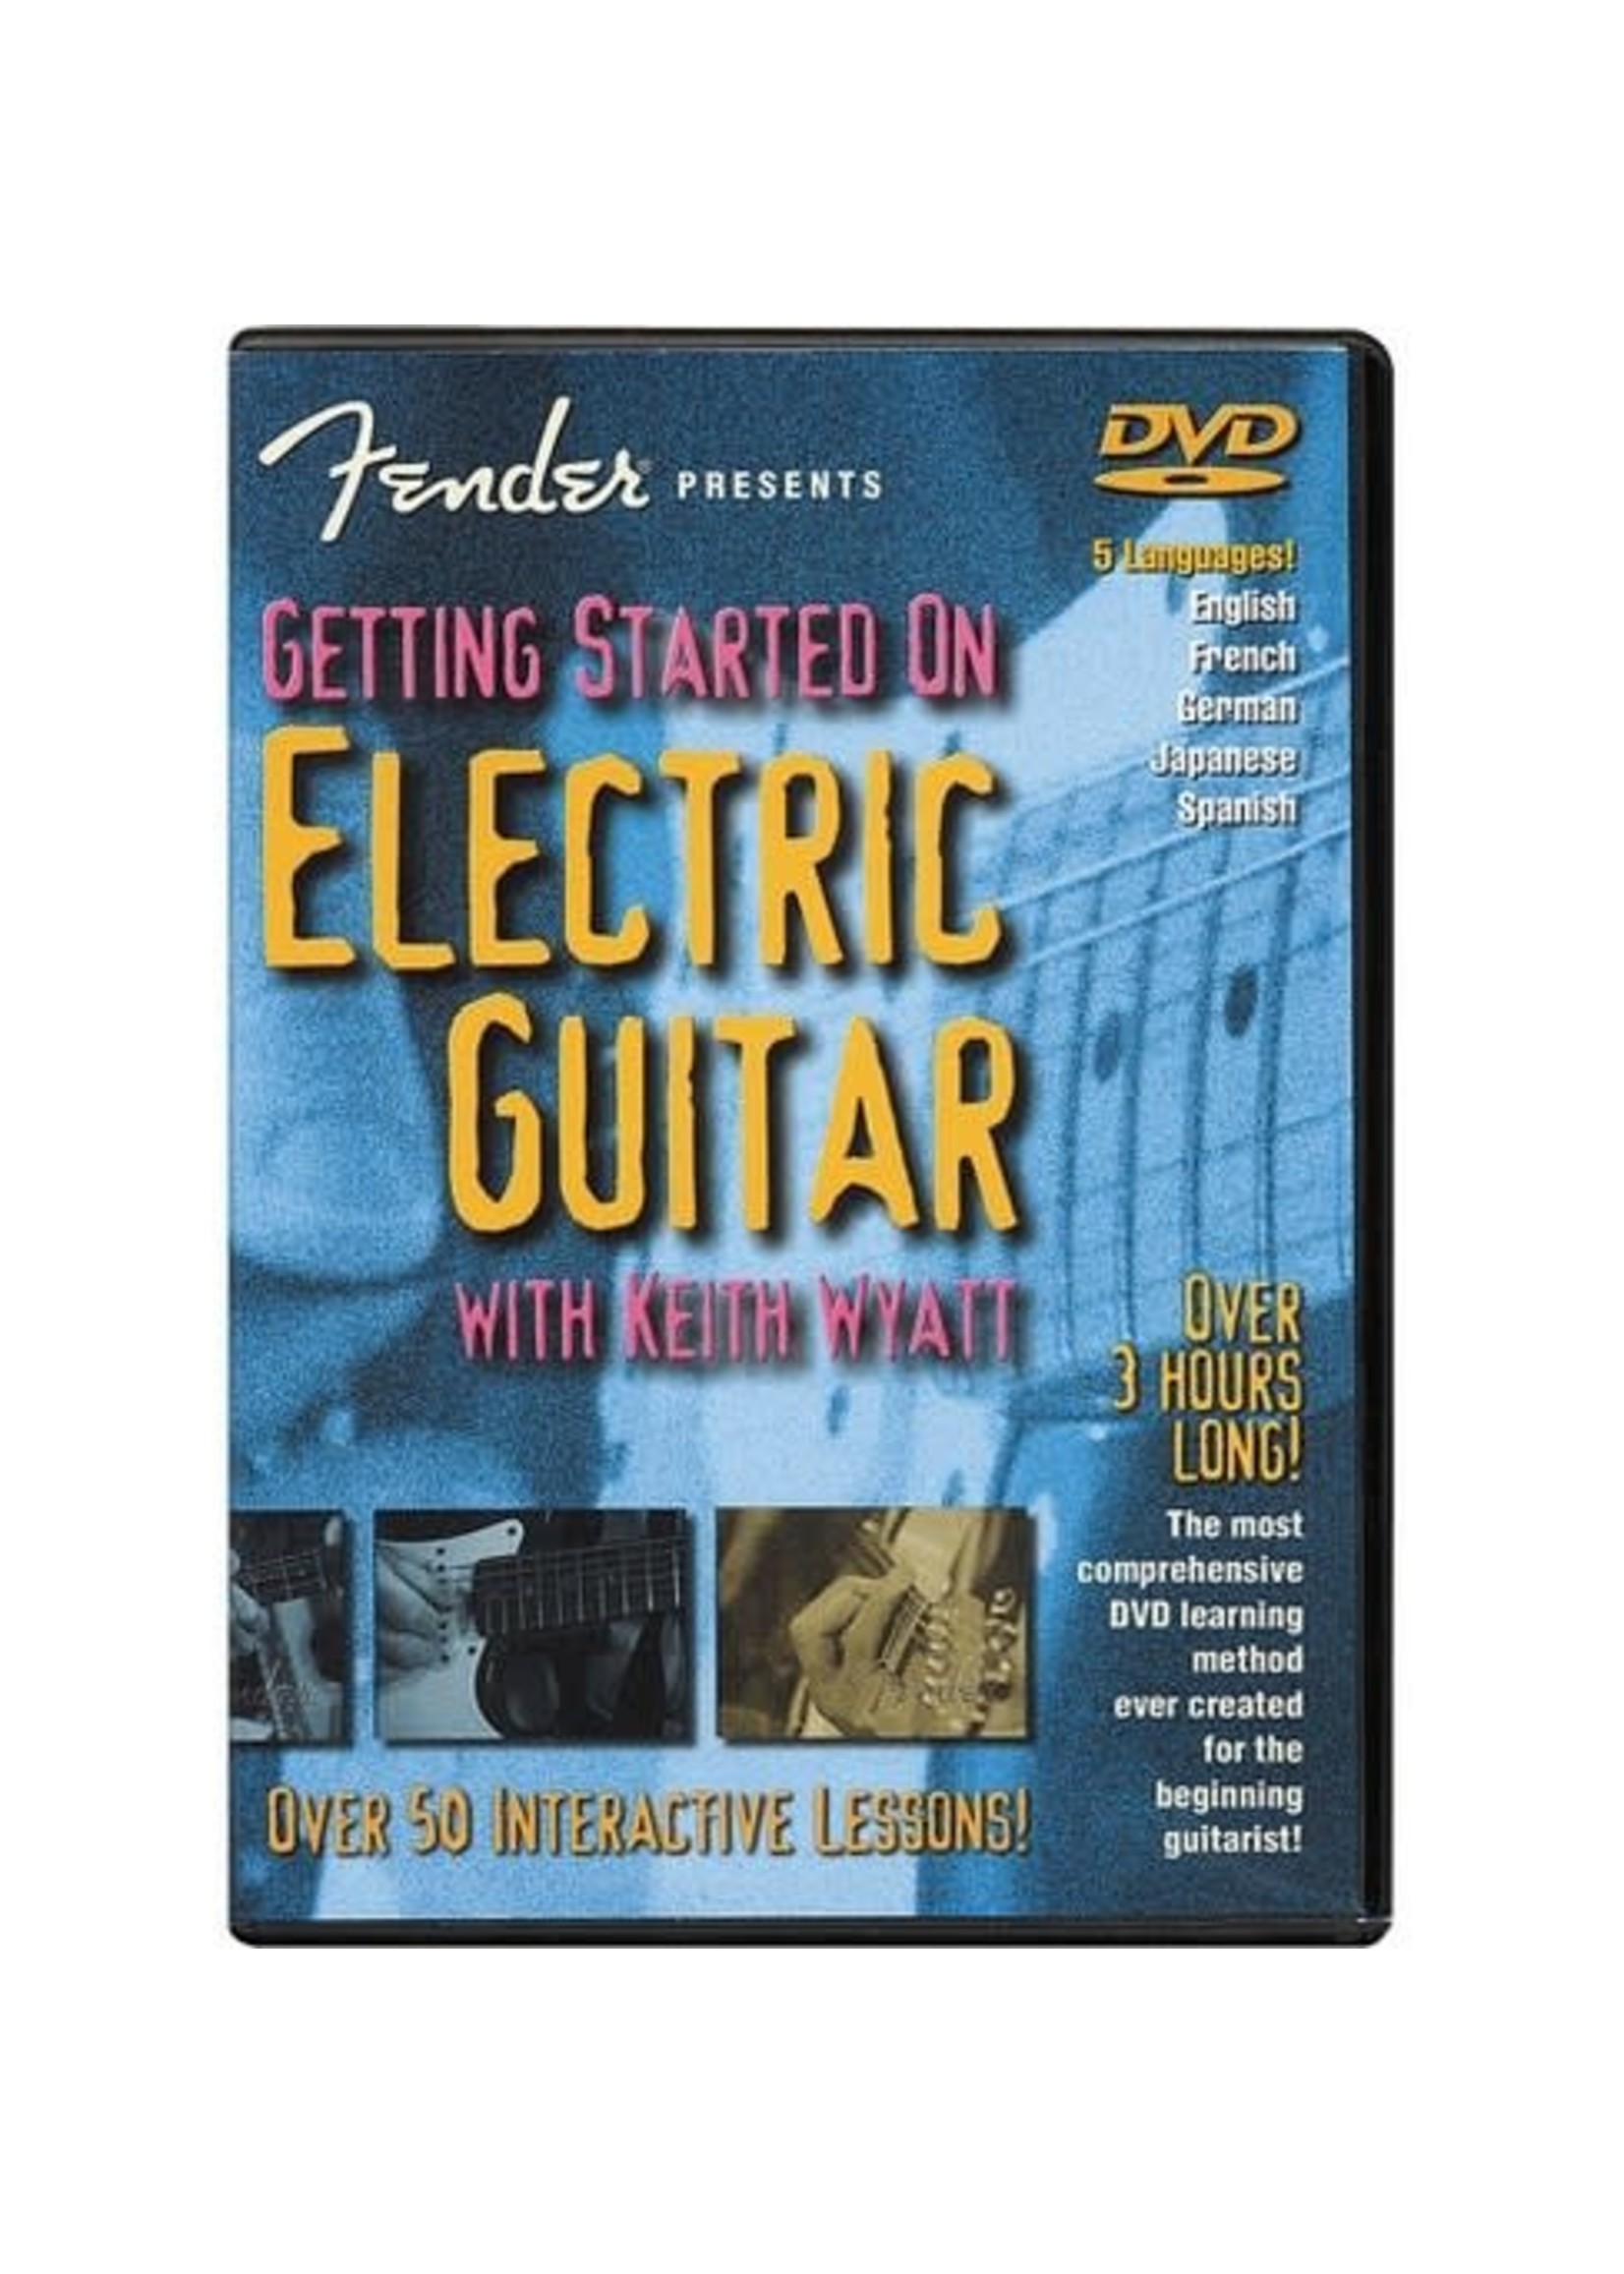 Fender Pres: Getting Started Electric Guitar DVD